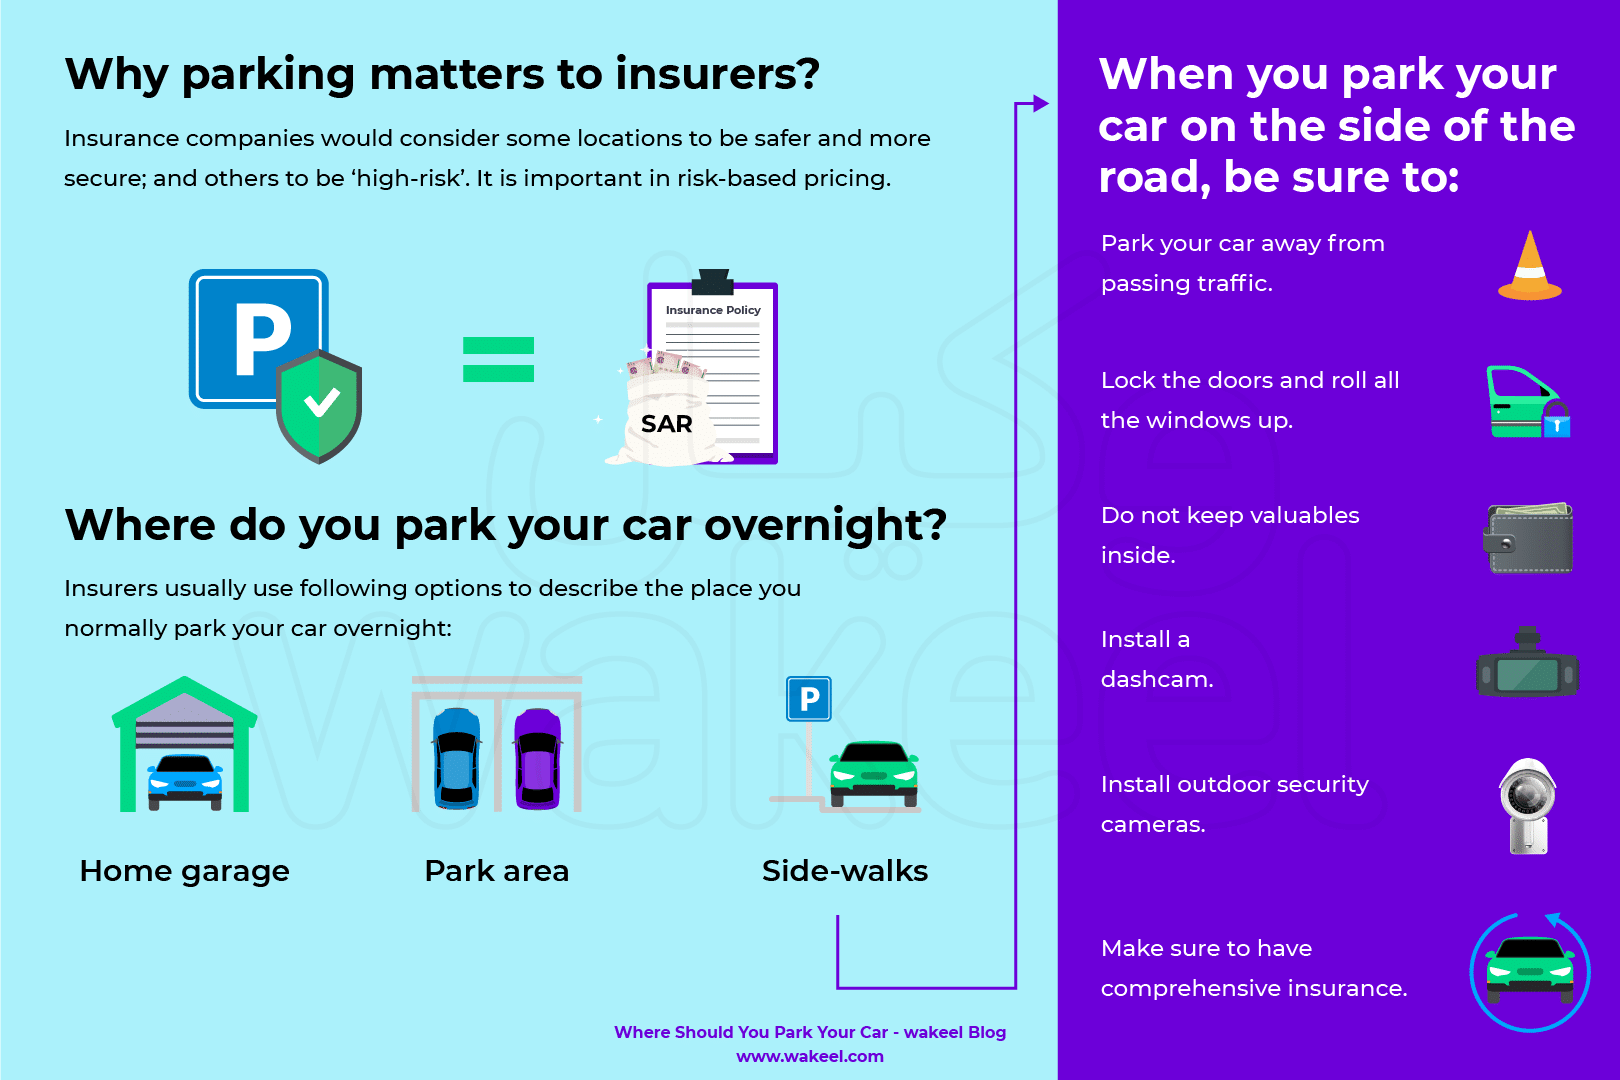  the location in which your park your car plays the most important role in calculating your odds of damage, theft or vandalism.